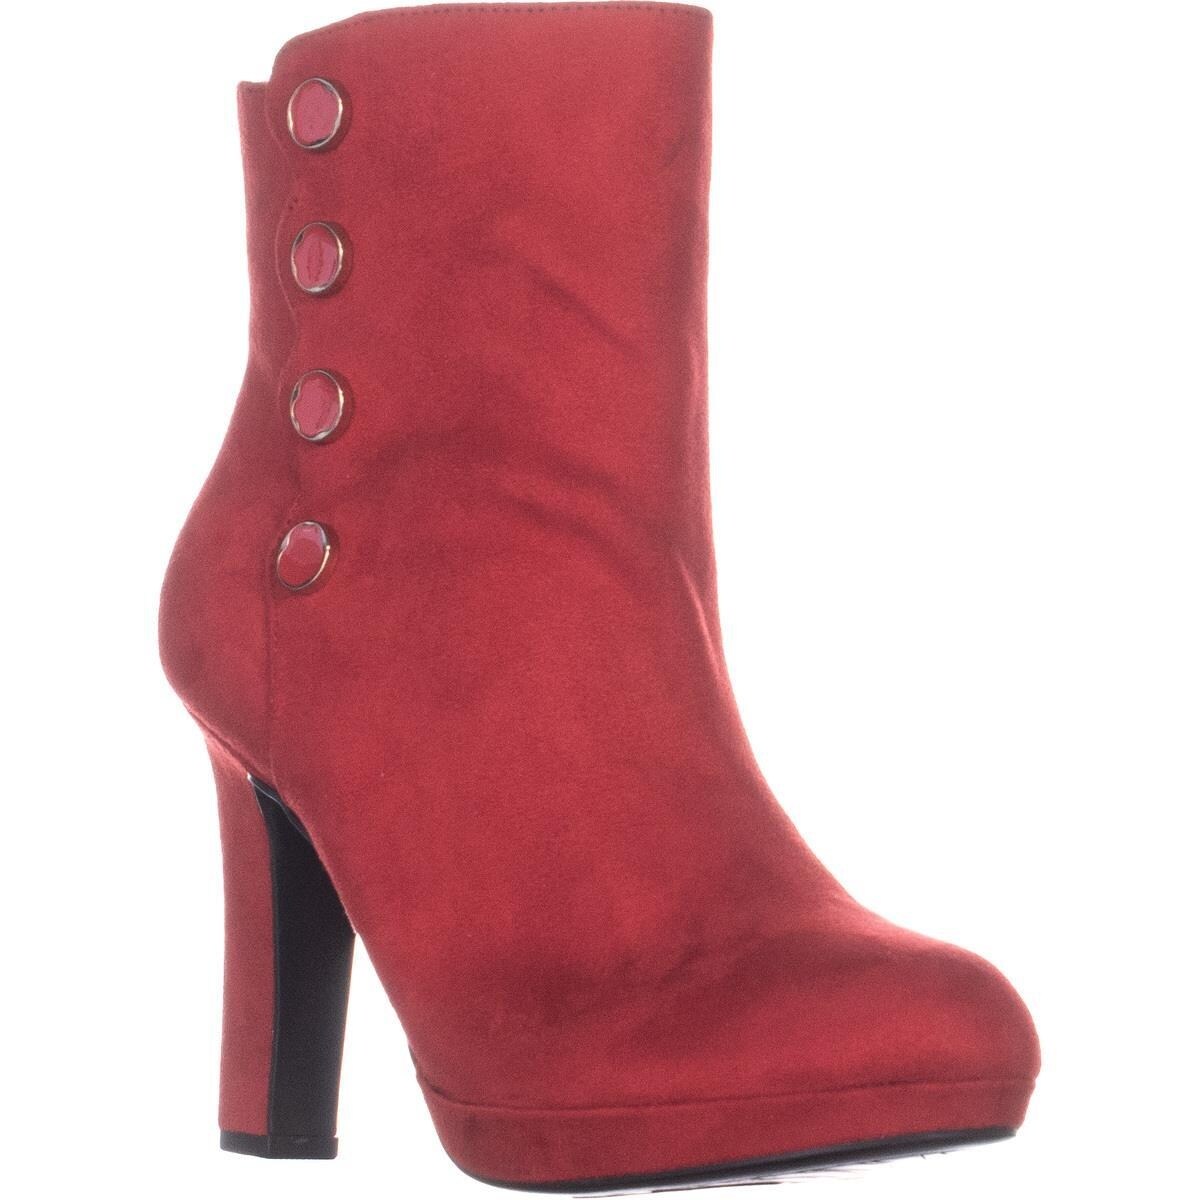 Impo Womens Odelina Closed Toe Ankle Fashion Boots, Classic Red, Size 9 ...